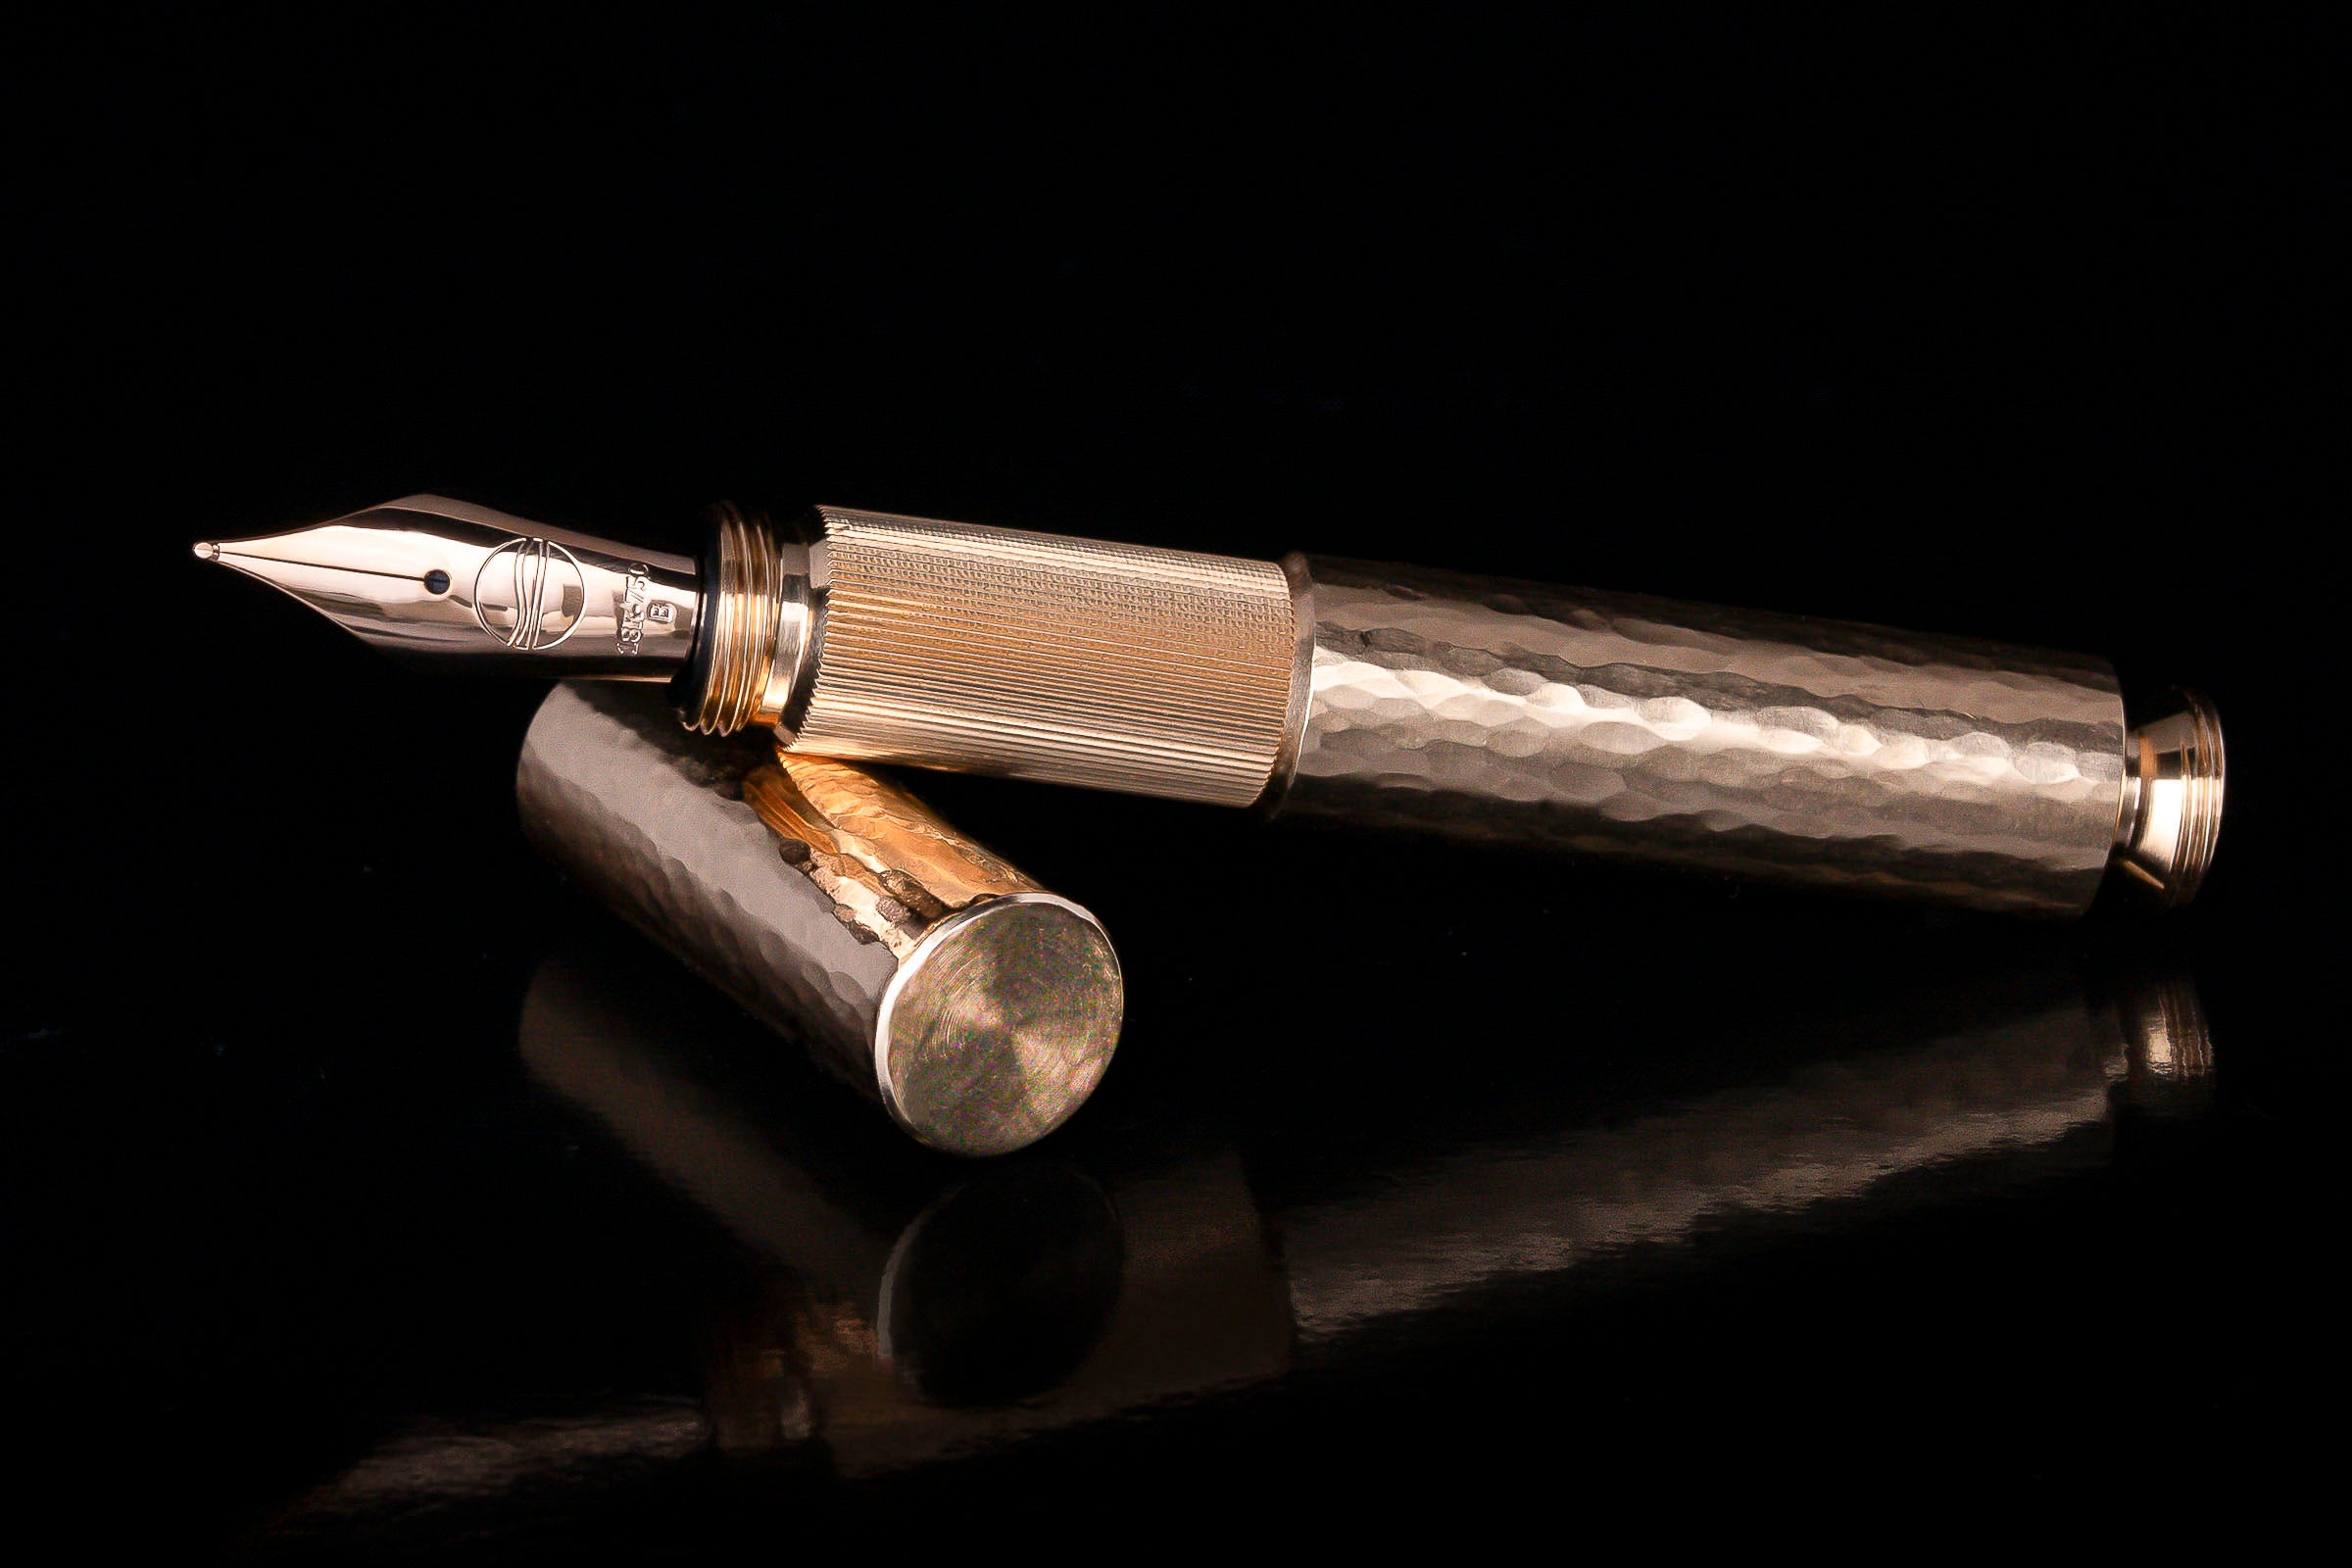 pocketmaster-pocket-fountain-pen-made-of-solid-gold-special-edition-hammered-18k-750-rose-gold